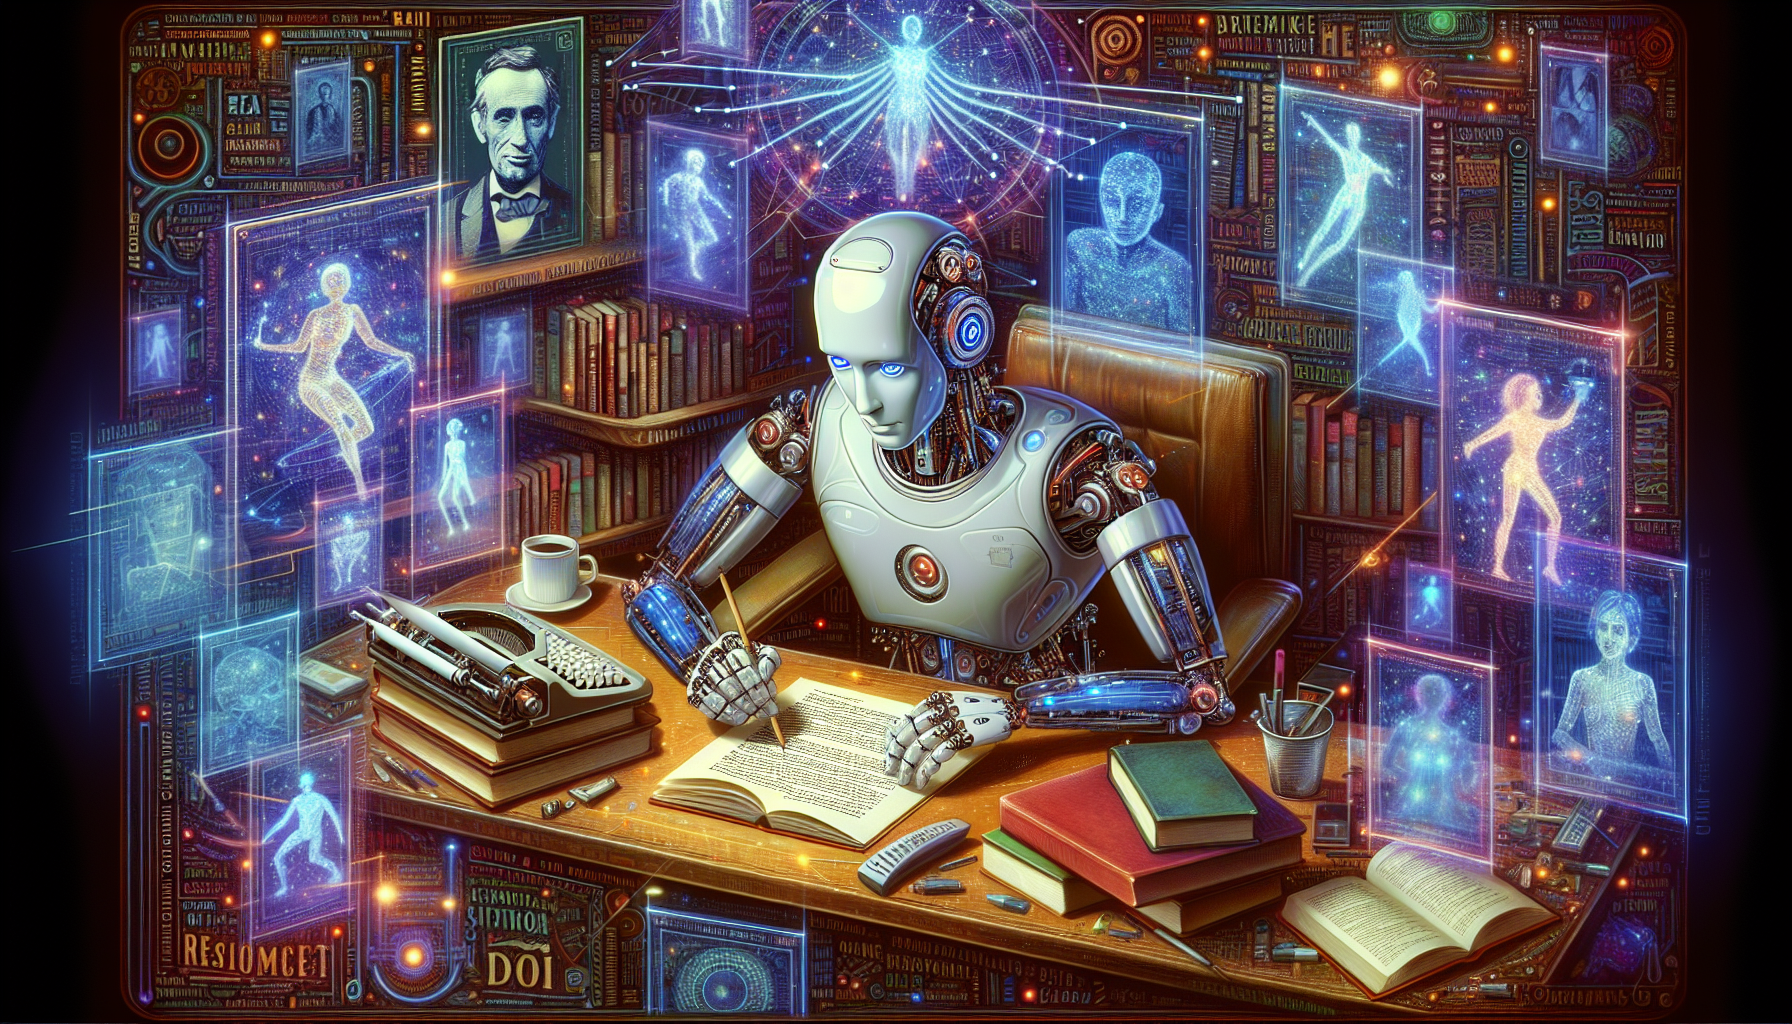 An AI robot sitting at a desk writing a screenplay, surrounded by classic novels and film posters, with digital holograms of character archetypes floating around it.